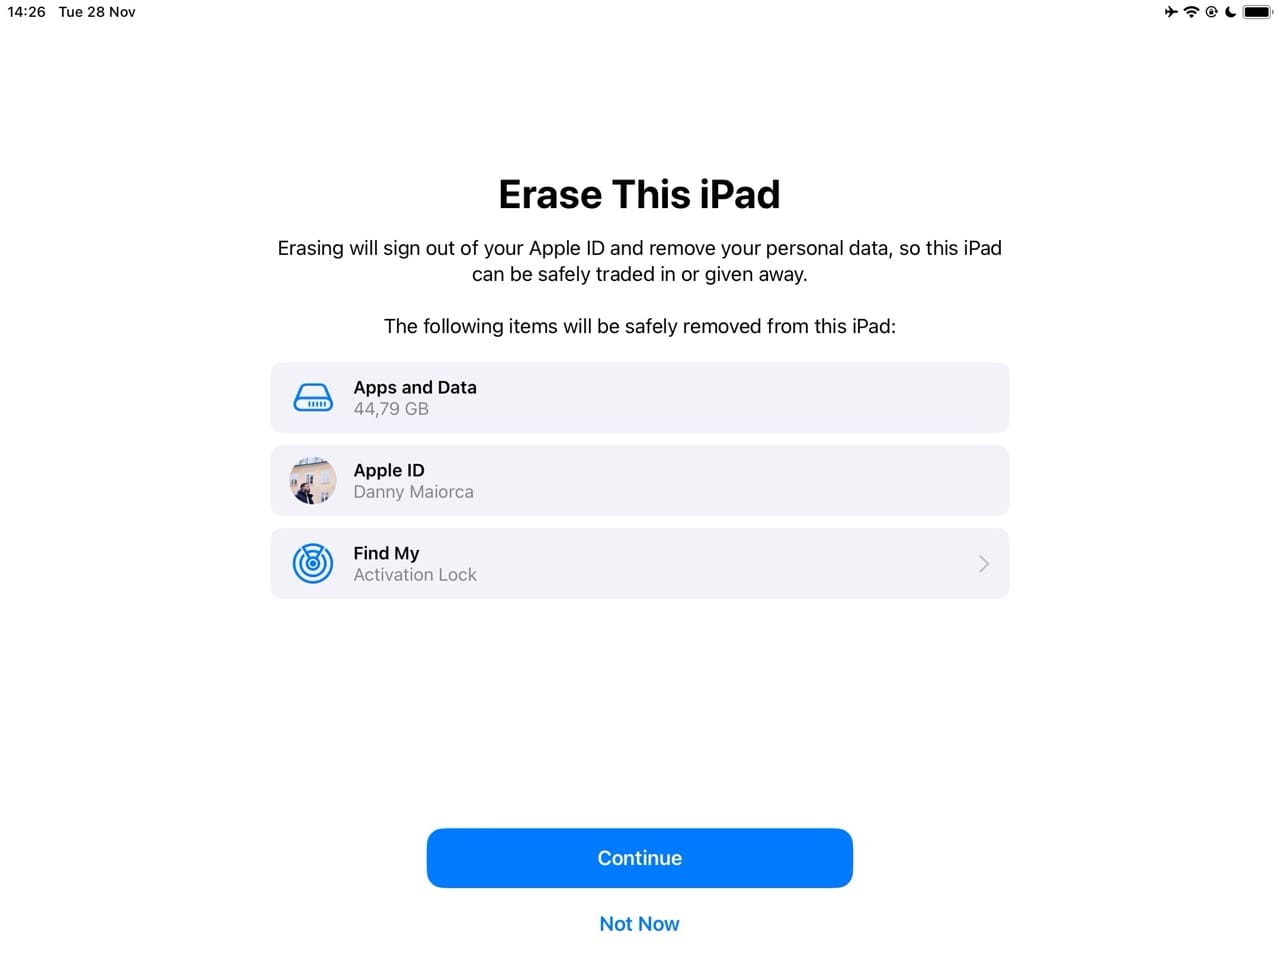 The Erase Settings page on iPadOS